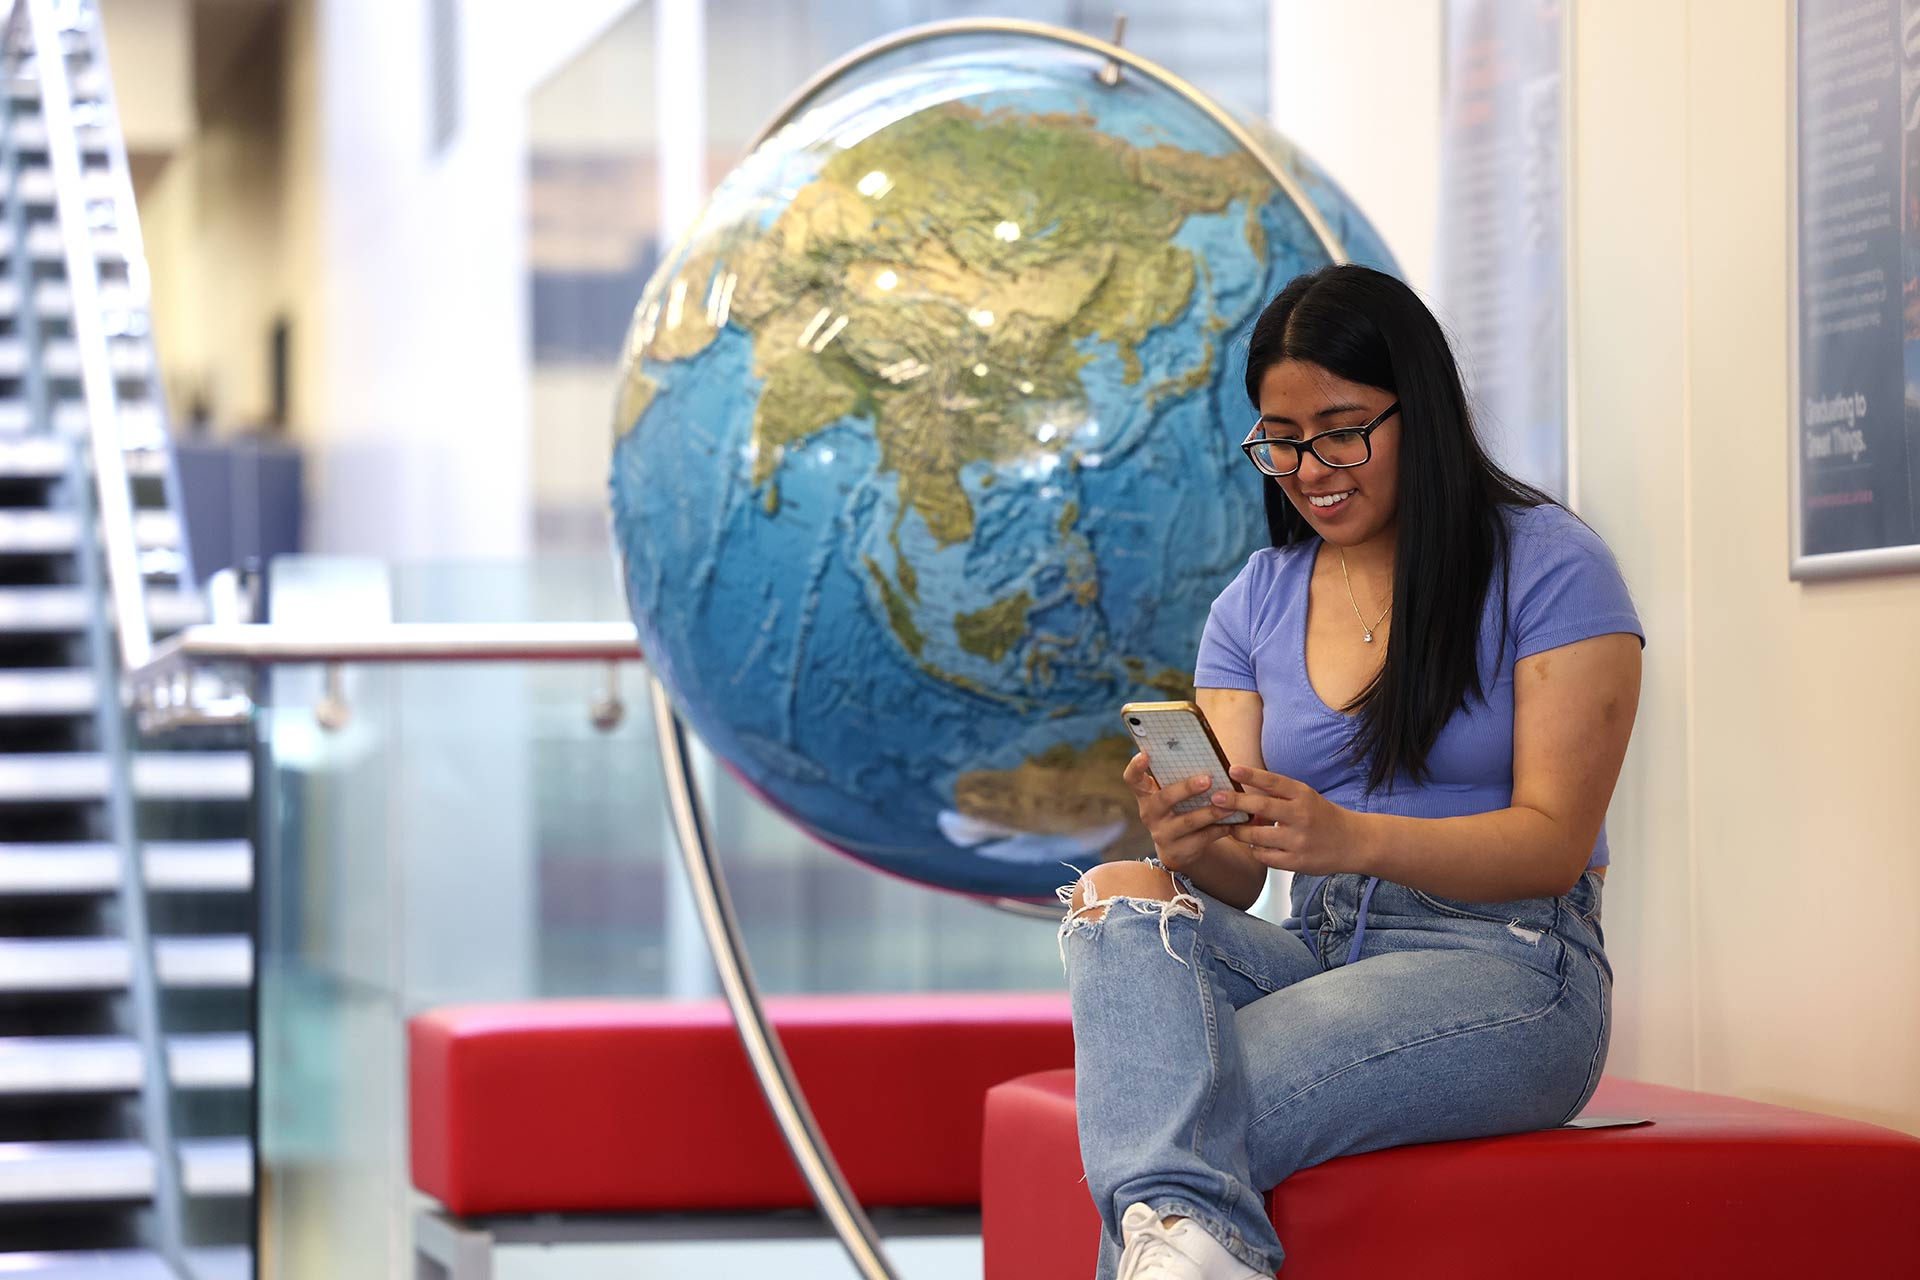 Student sits on a bench in front of a large colour model of the globe